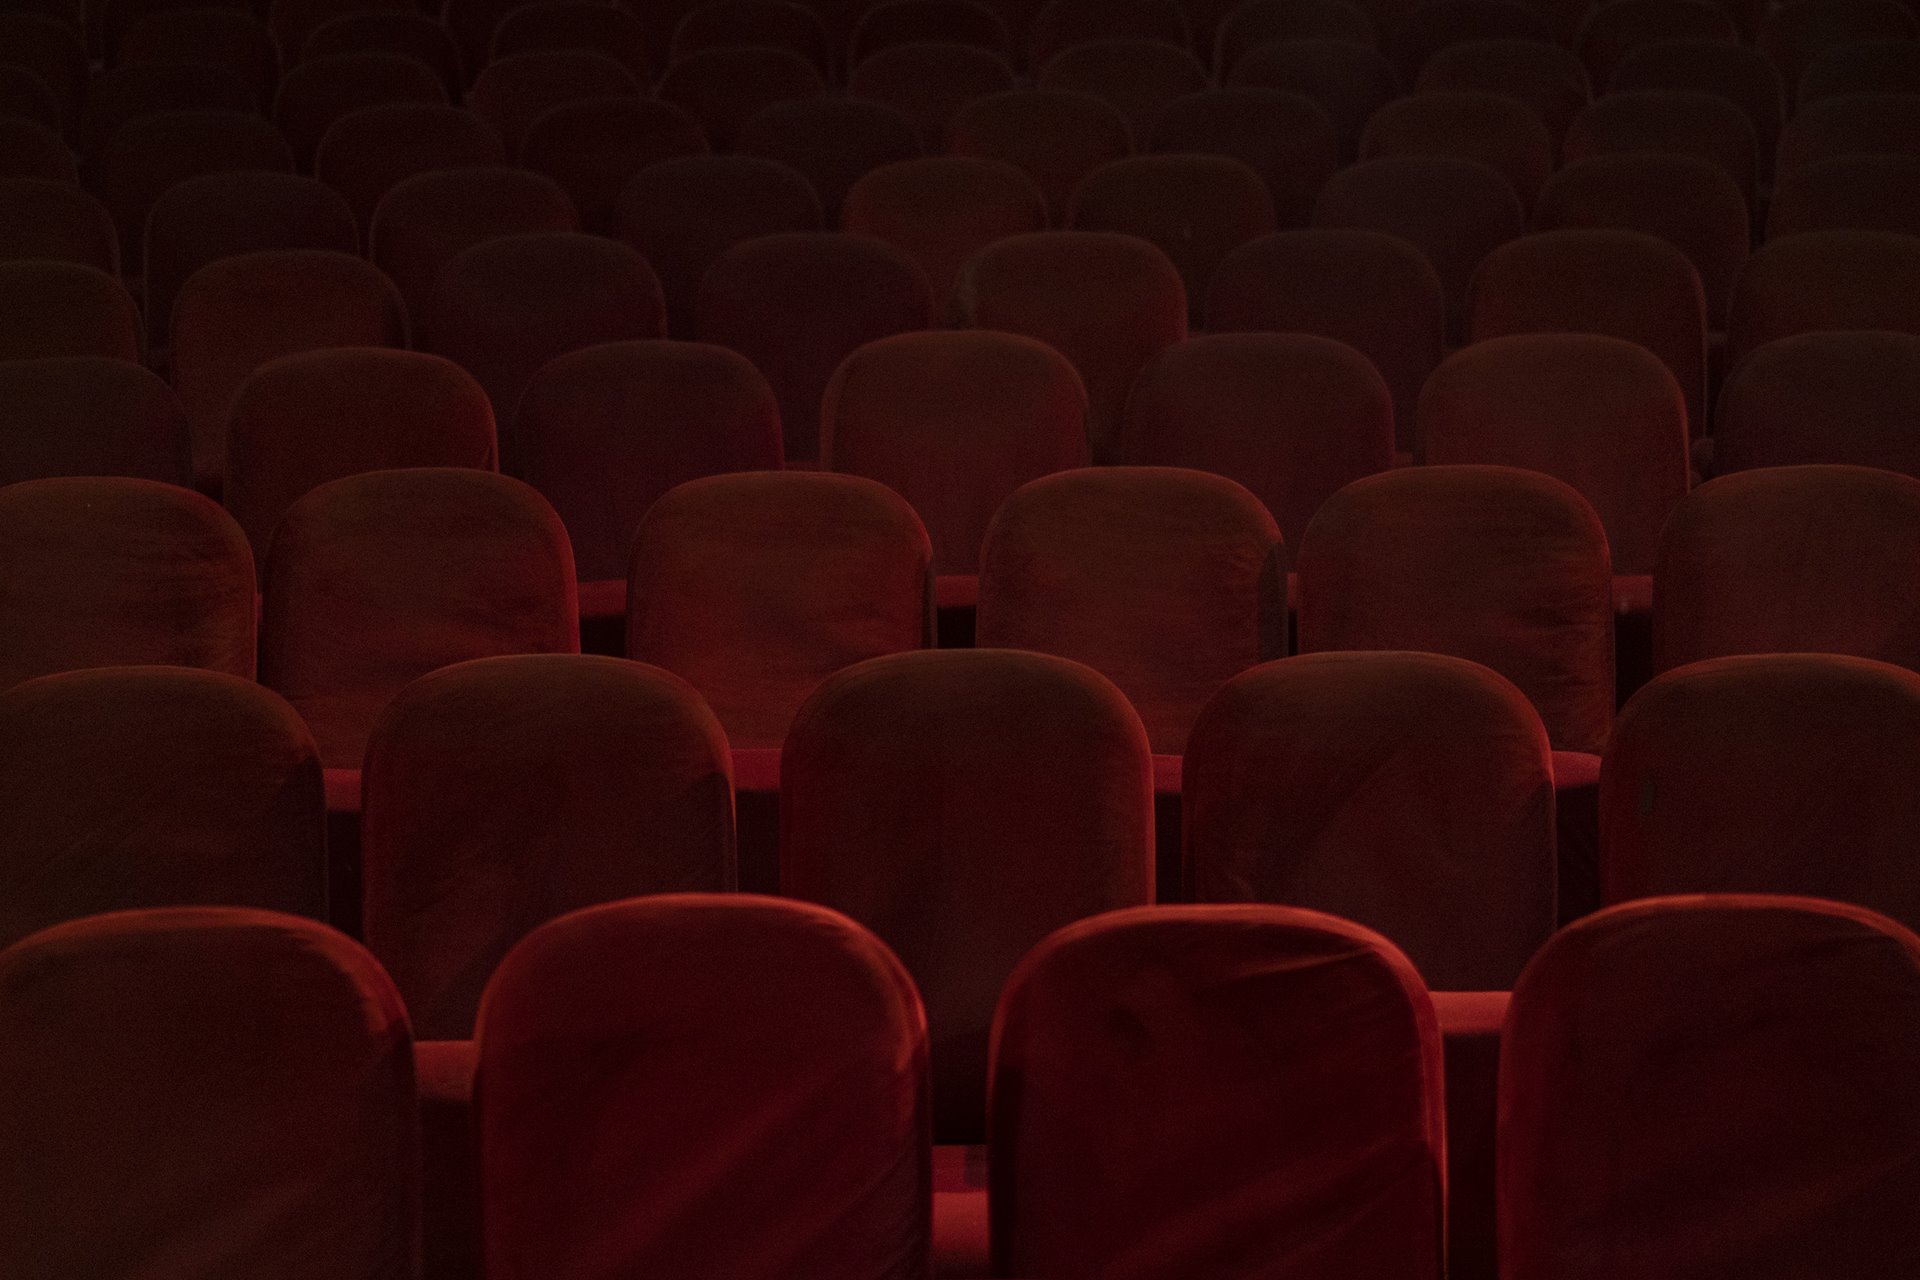 Seats stand empty inside the Ariana Cinema, in Kabul, Afghanistan. The Taliban had ordered cinemas to stop operating nearly three months earlier.